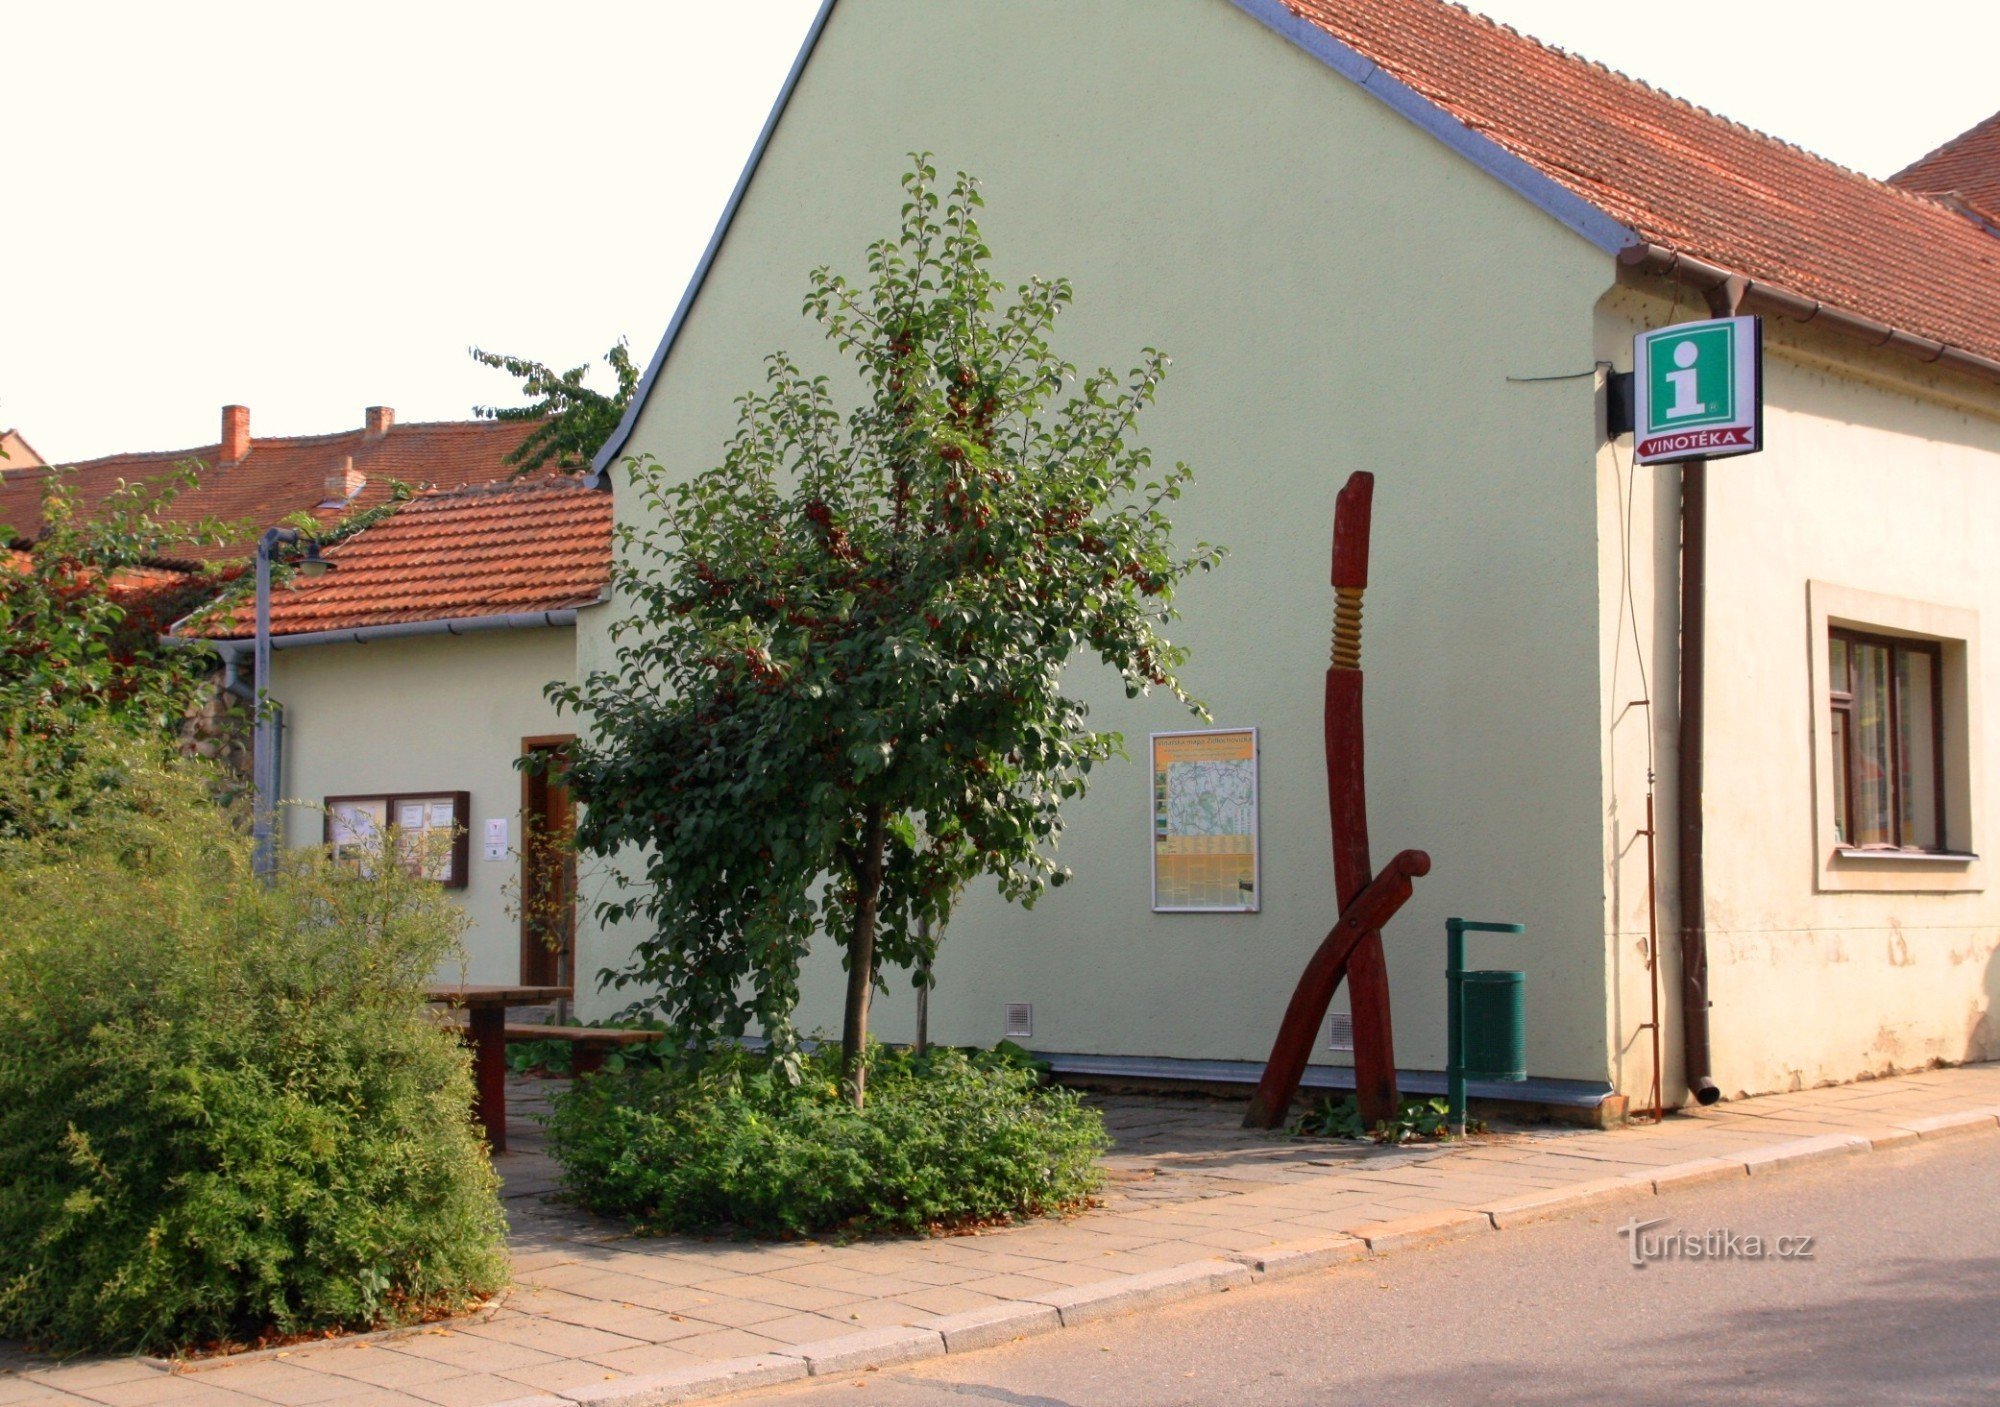 Židlochovice - regional tourist and information center and wine shop